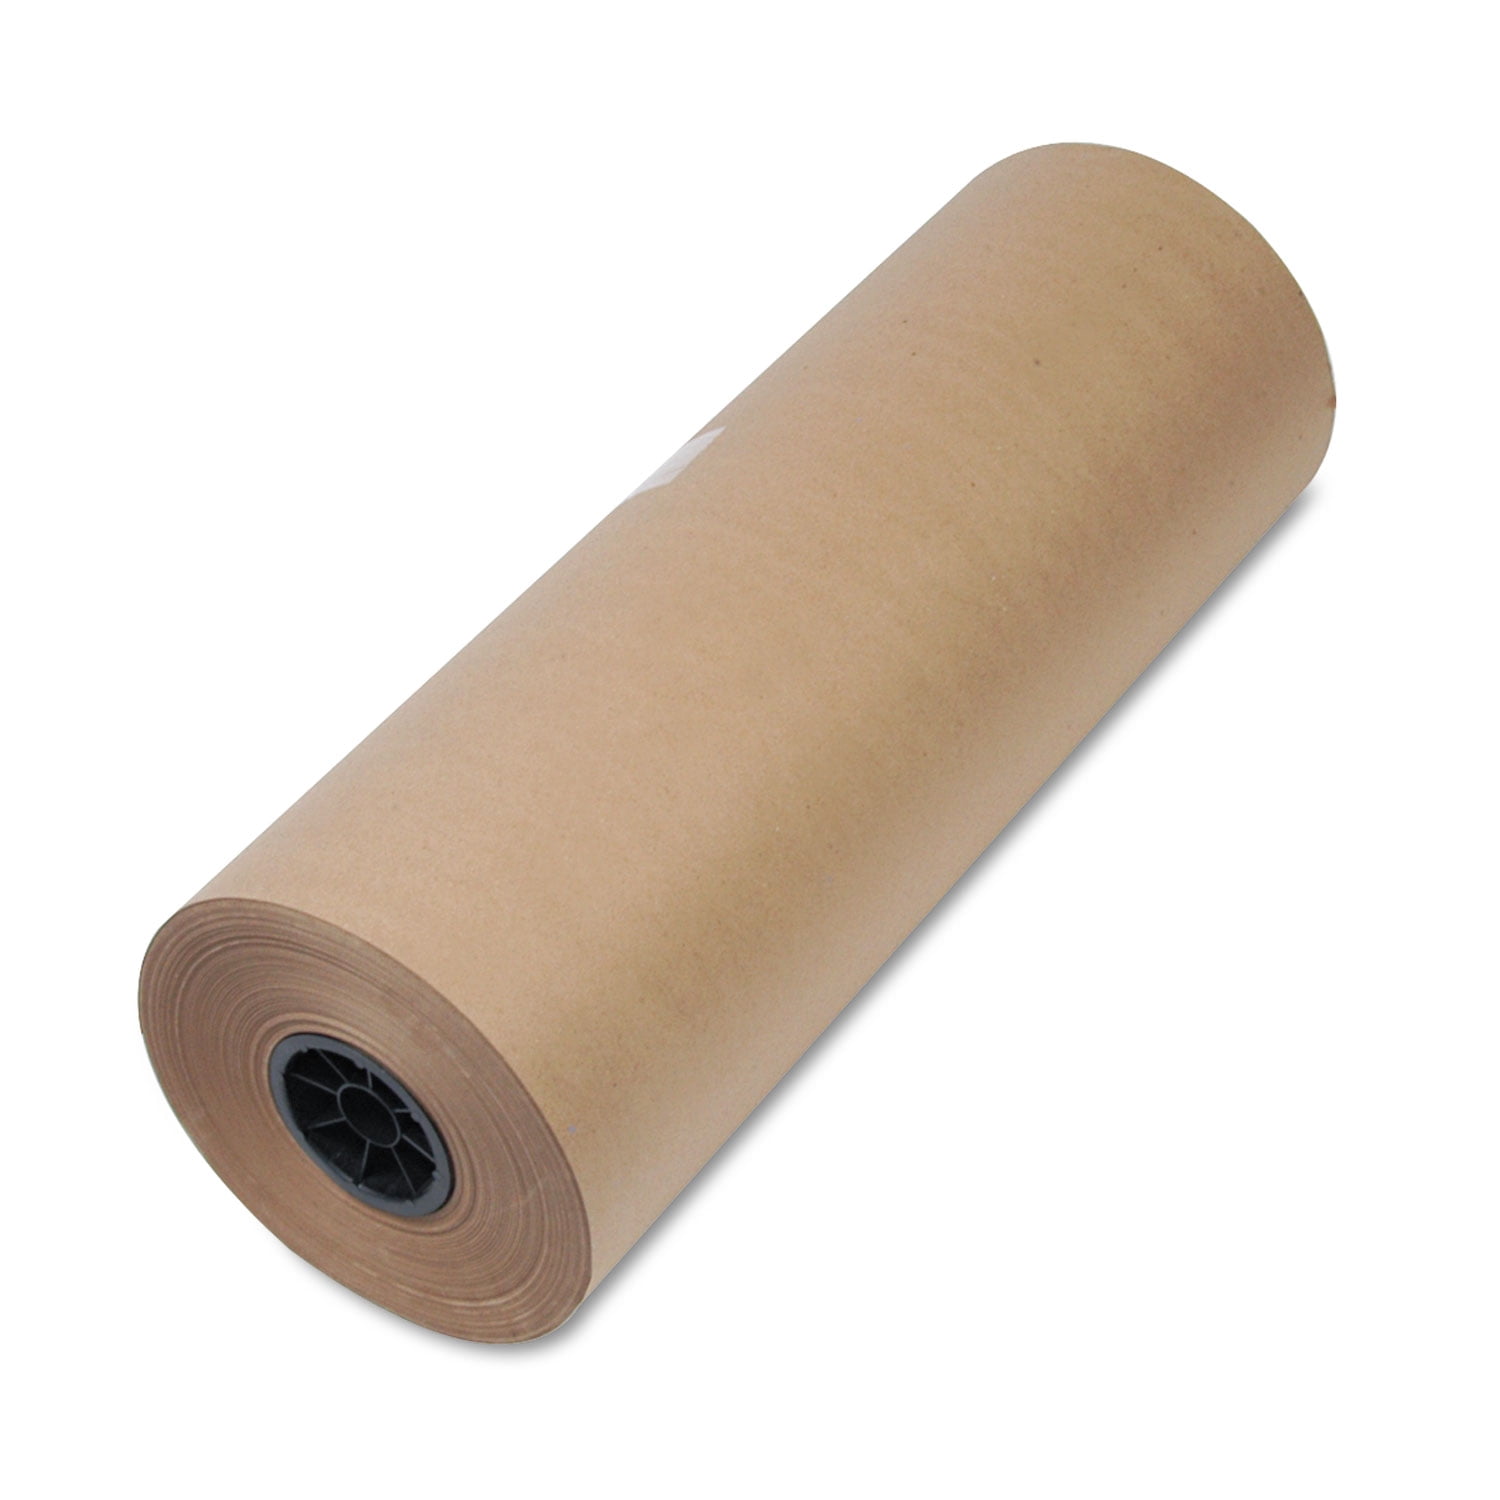 UOFFICE Kraft Paper Roll 600'x12 50lb Brown Wrapping Cushioning Fill 